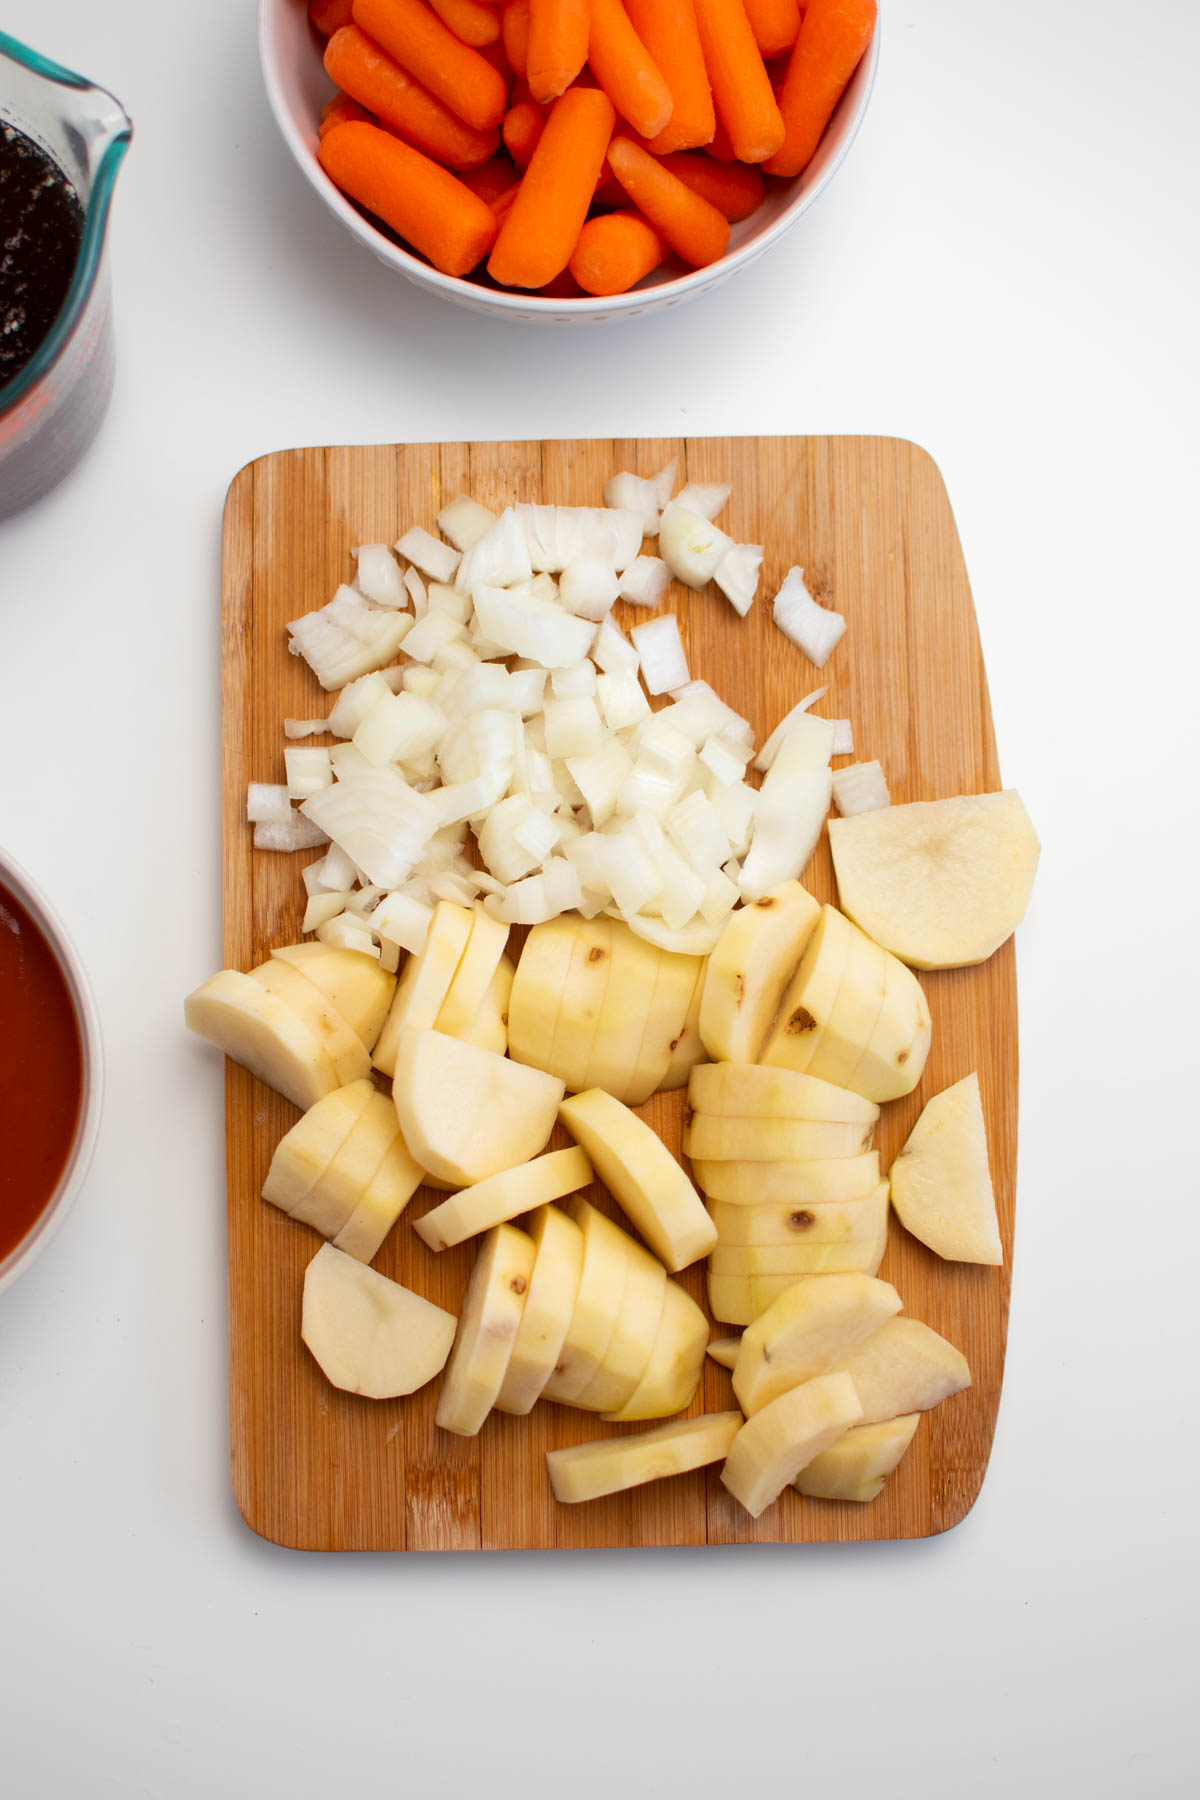 Chopped onion and potato slices on wood cutting board all on white table.